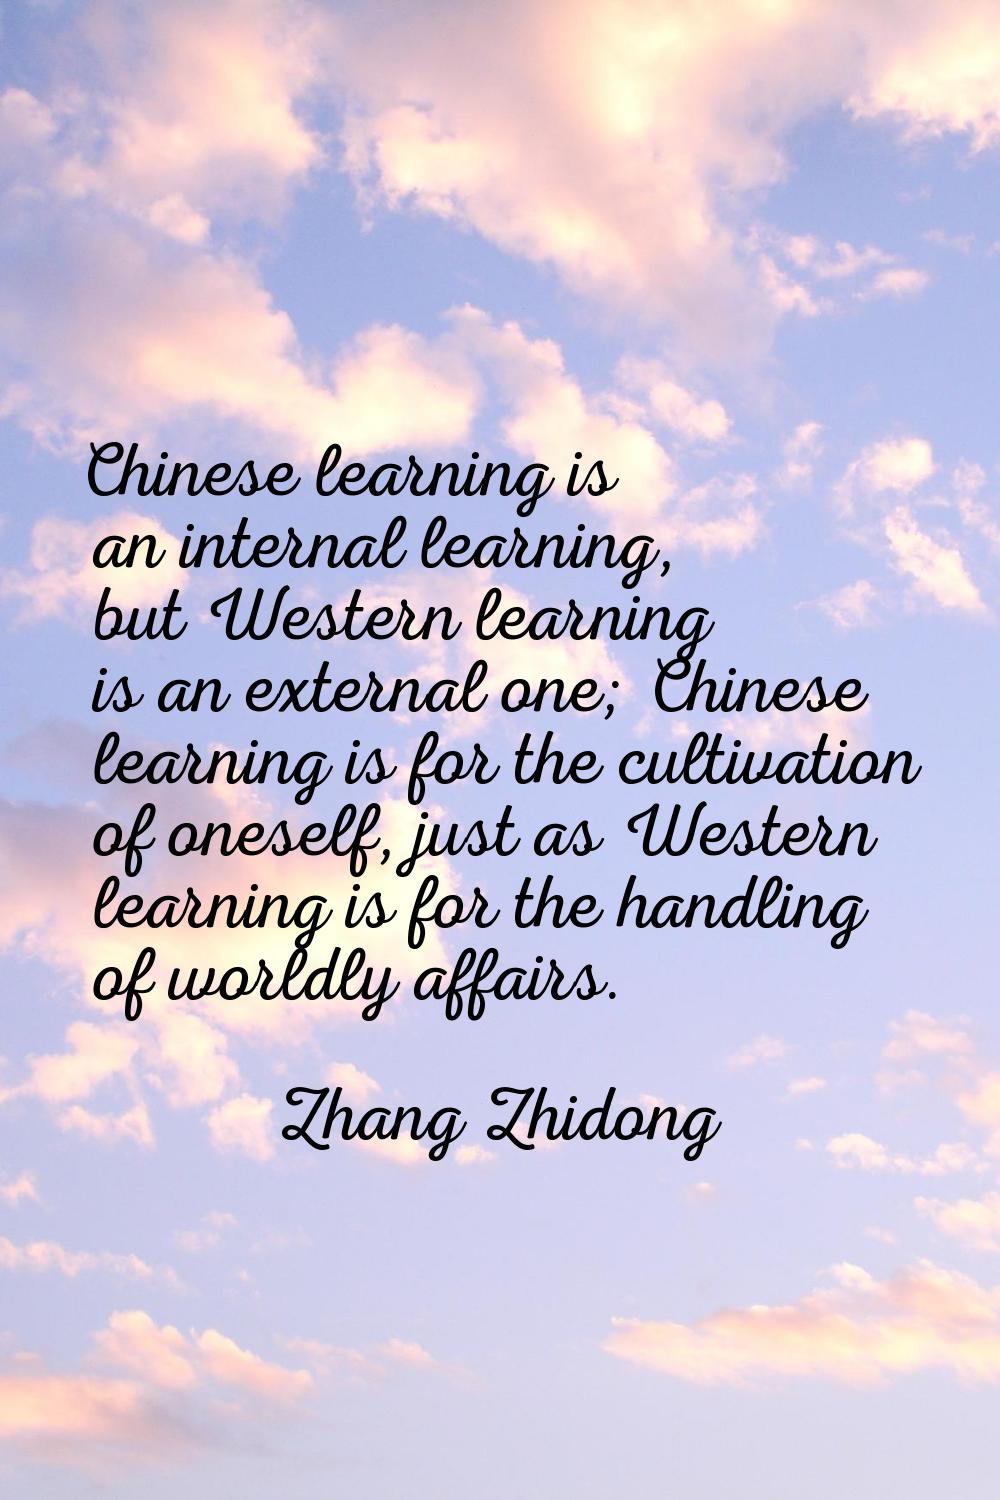 Chinese learning is an internal learning, but Western learning is an external one; Chinese learning